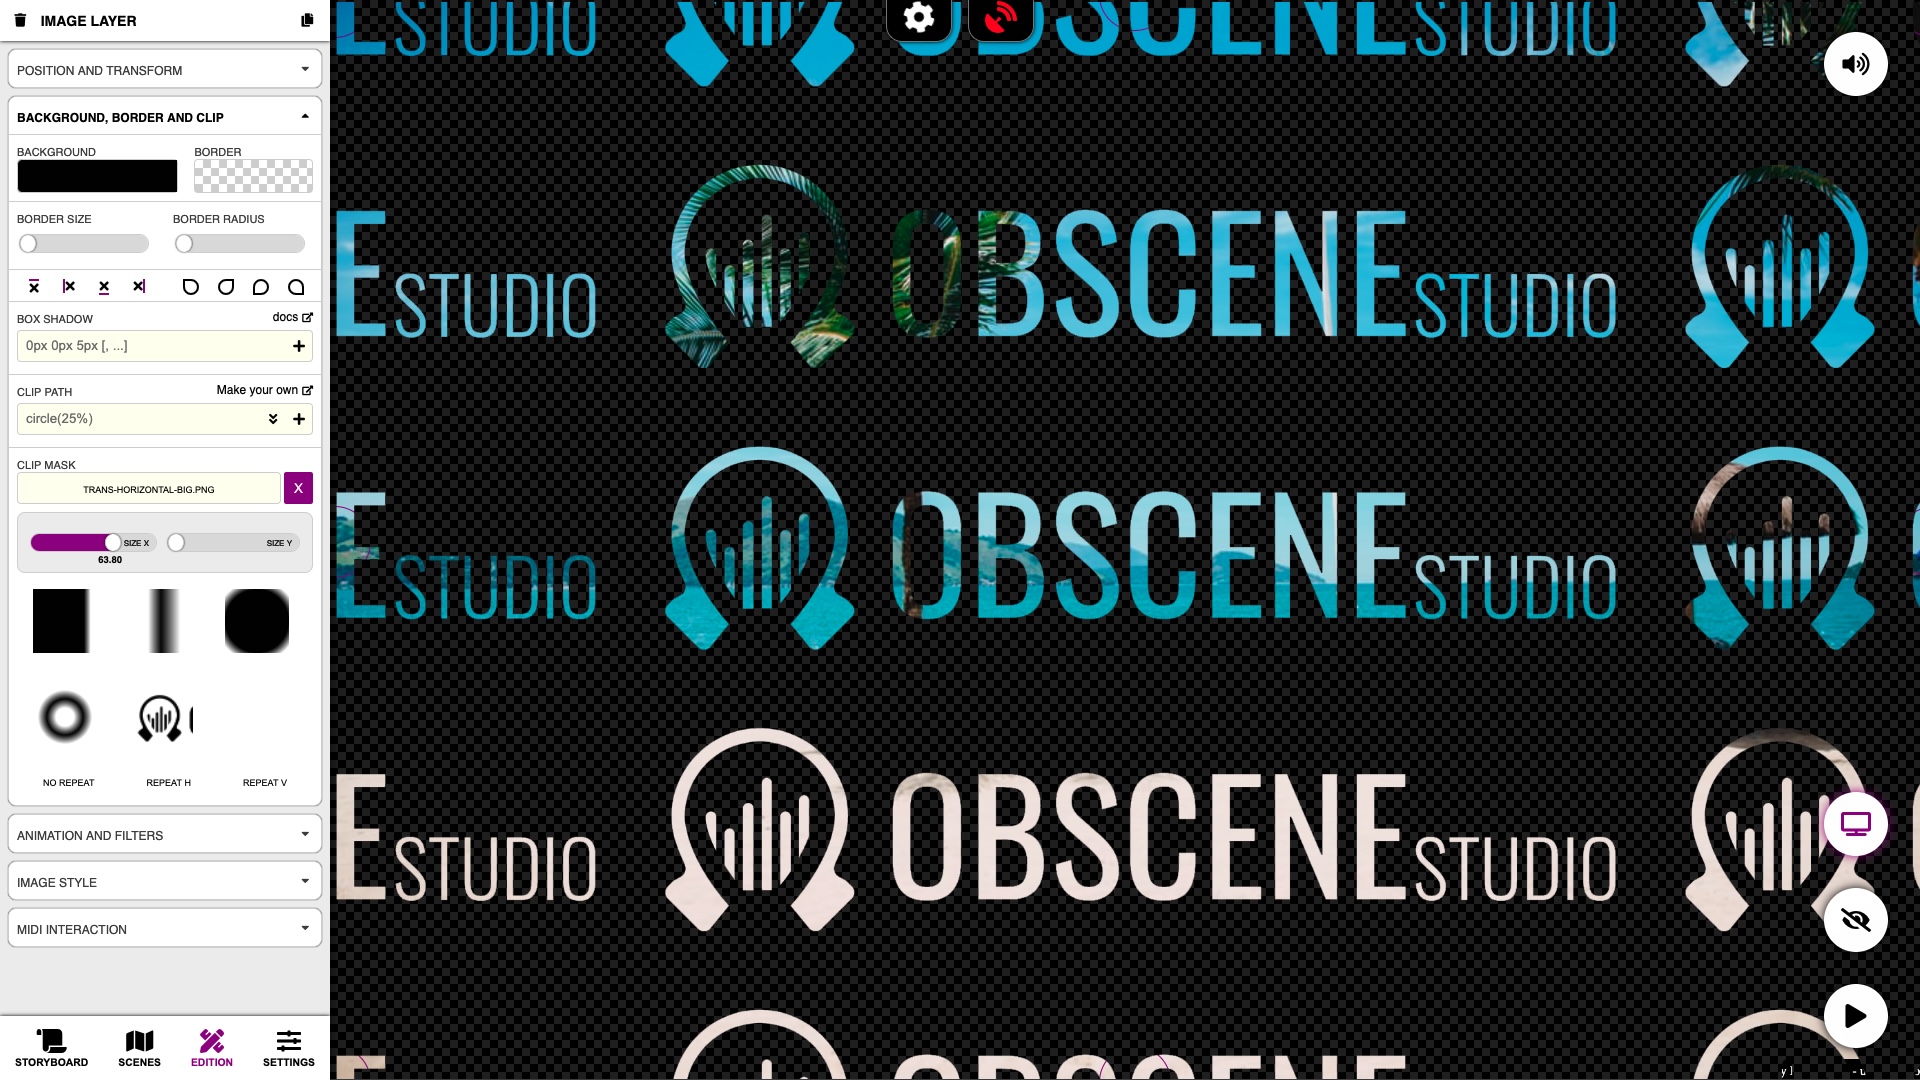 A Custom PNG Mask with repeat options in Obscene Studio